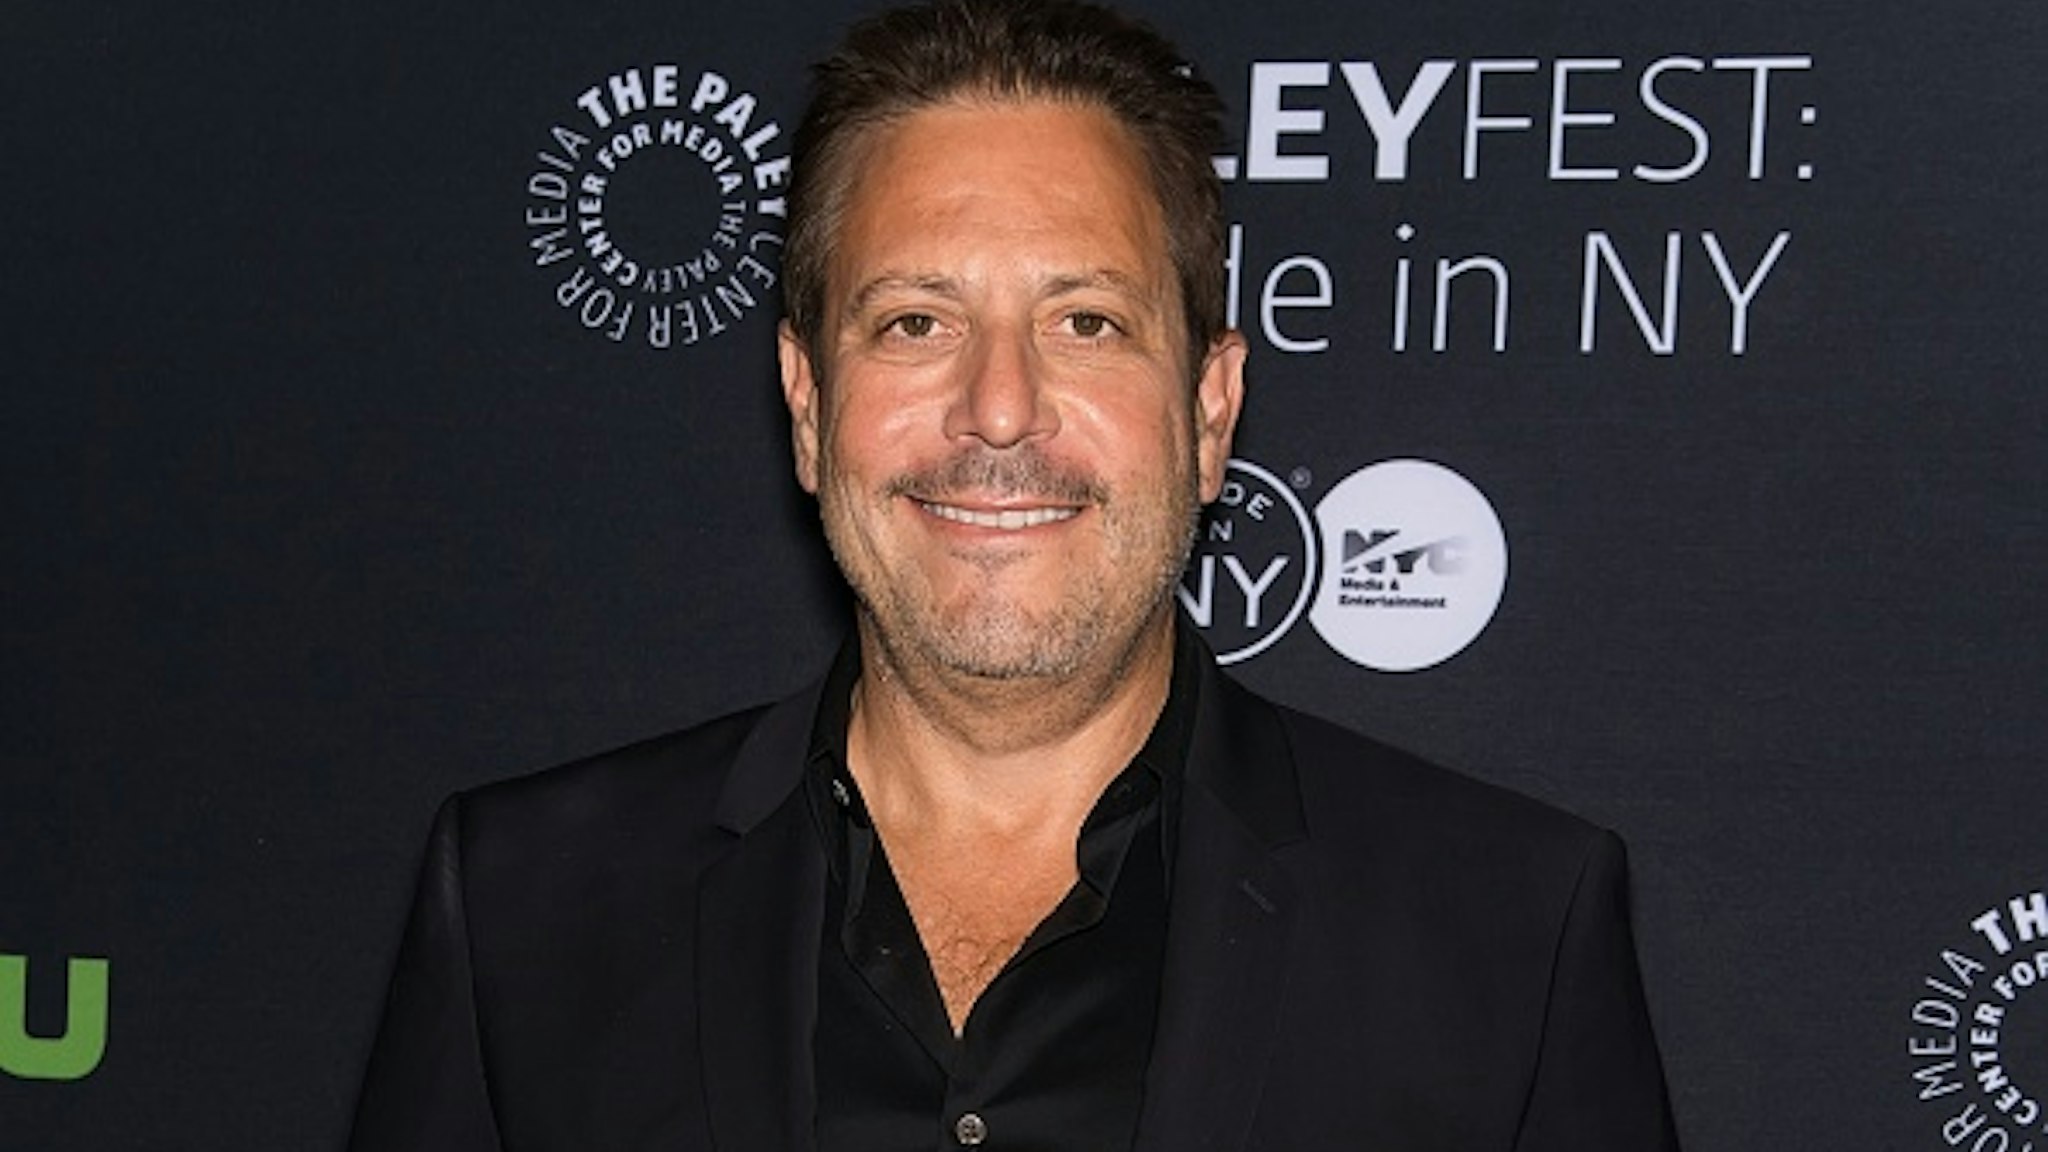 NEW YORK, NY - OCTOBER 10: Creator/Executive producer Darren Star attends the PaleyFest New York 2016 screening of 'Younger' at The Paley Center for Media on October 10, 2016 in New York City.